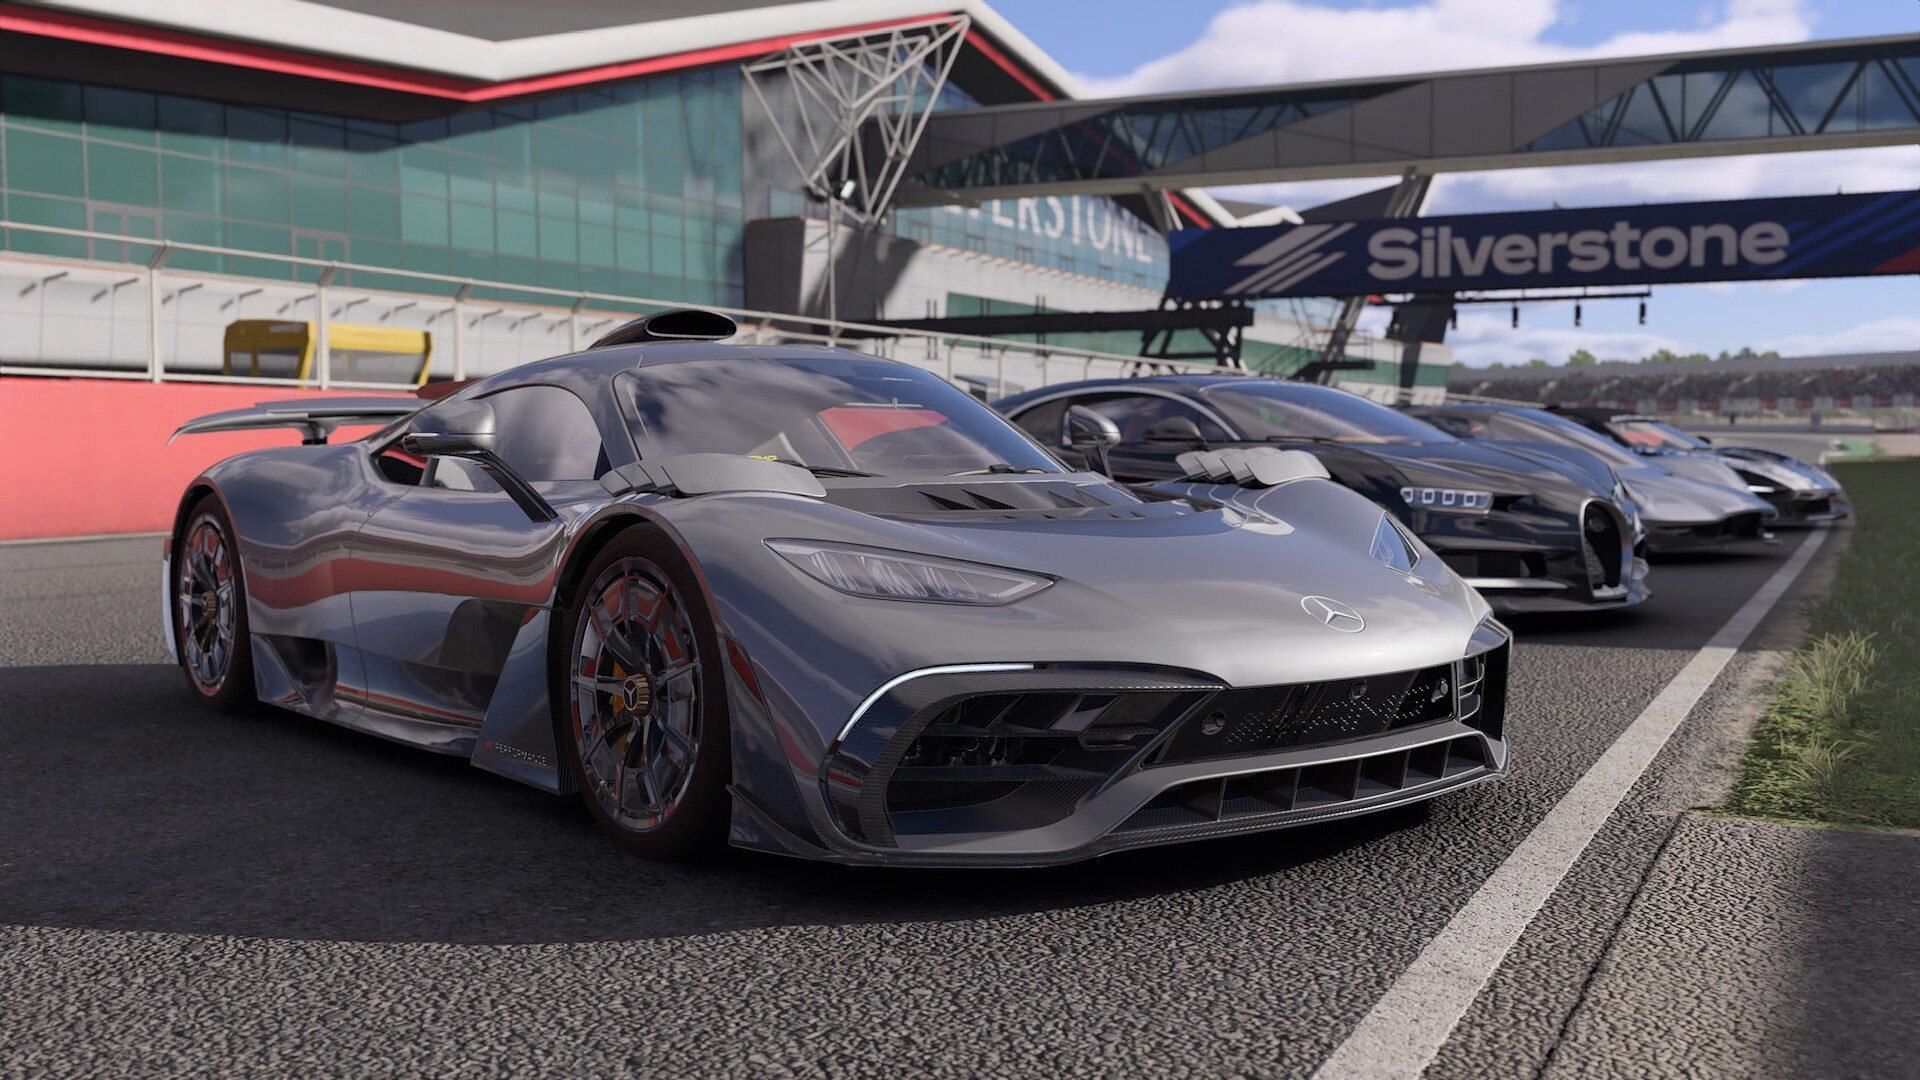 Forza Motorsport 7 PC performance review: a PC port in need of a